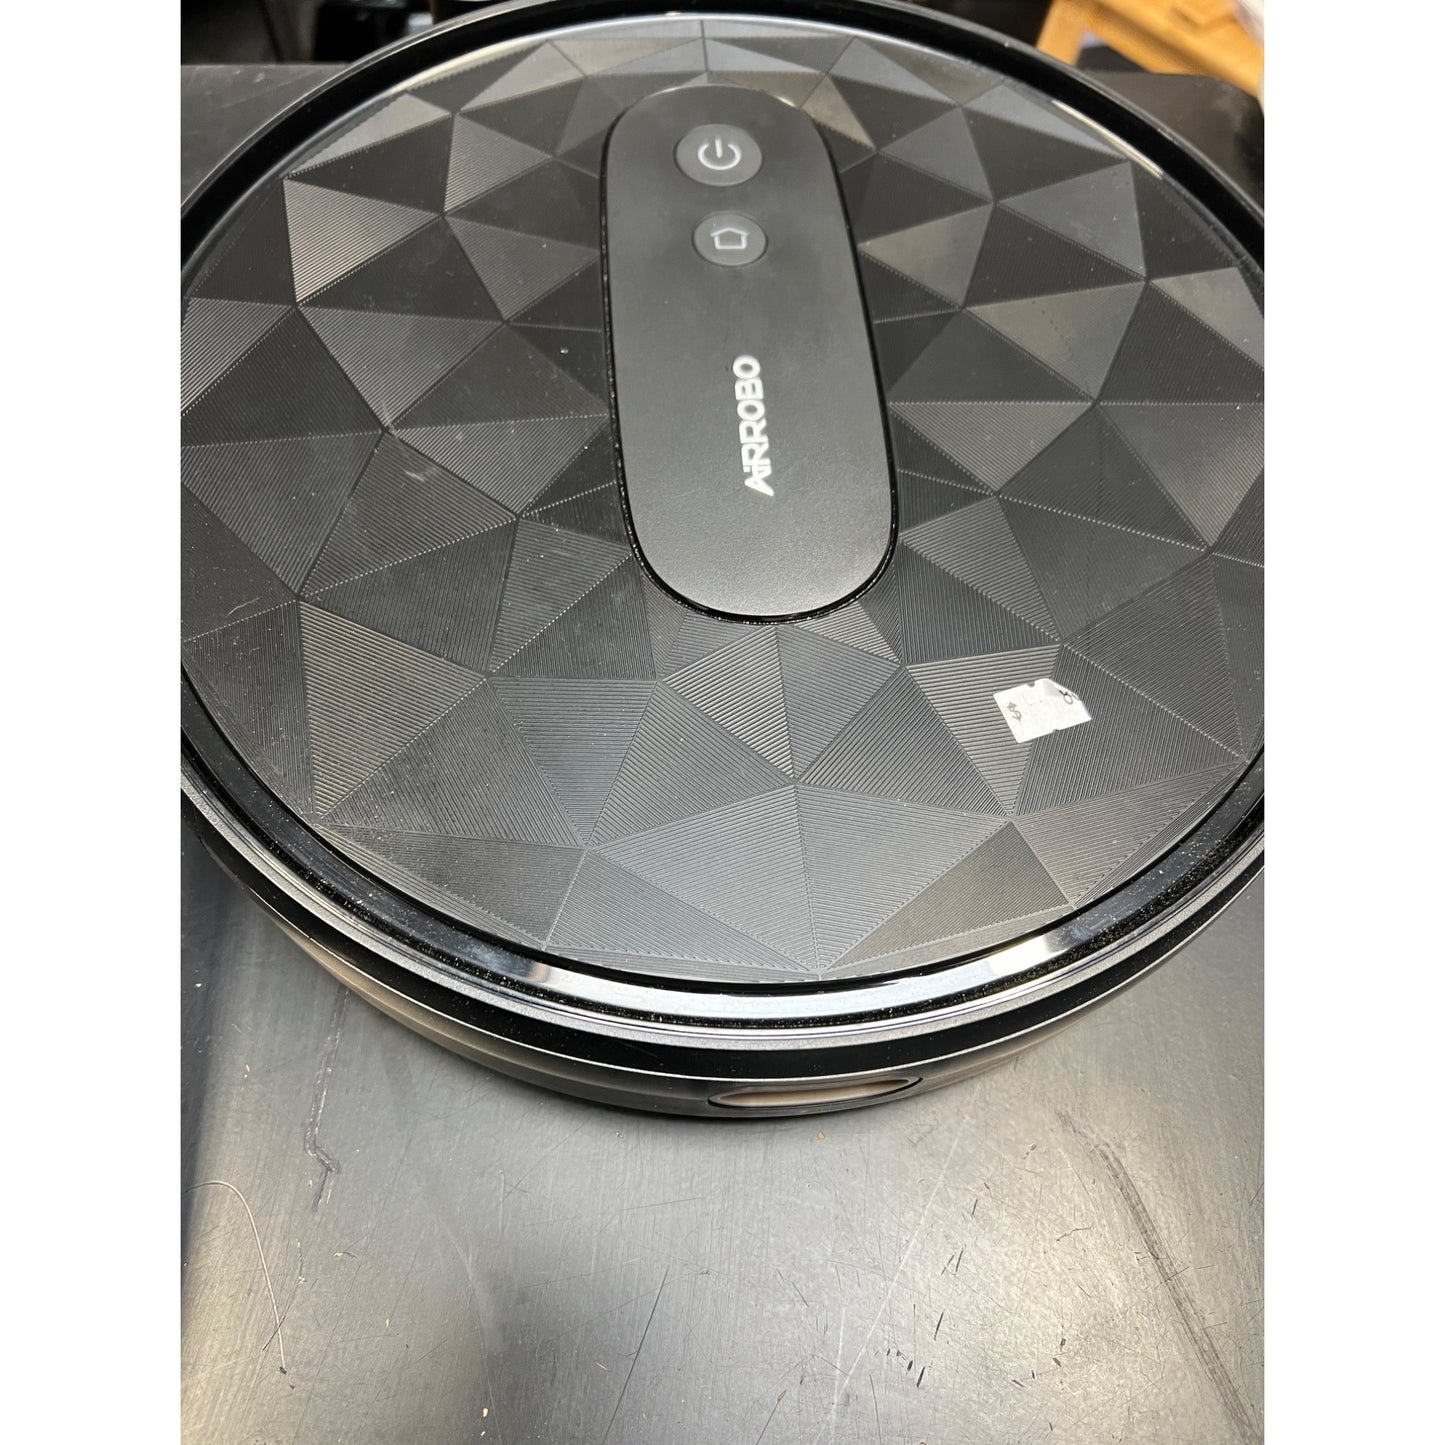 Robot Vacuum Cleaner - 2800 Pa Suction